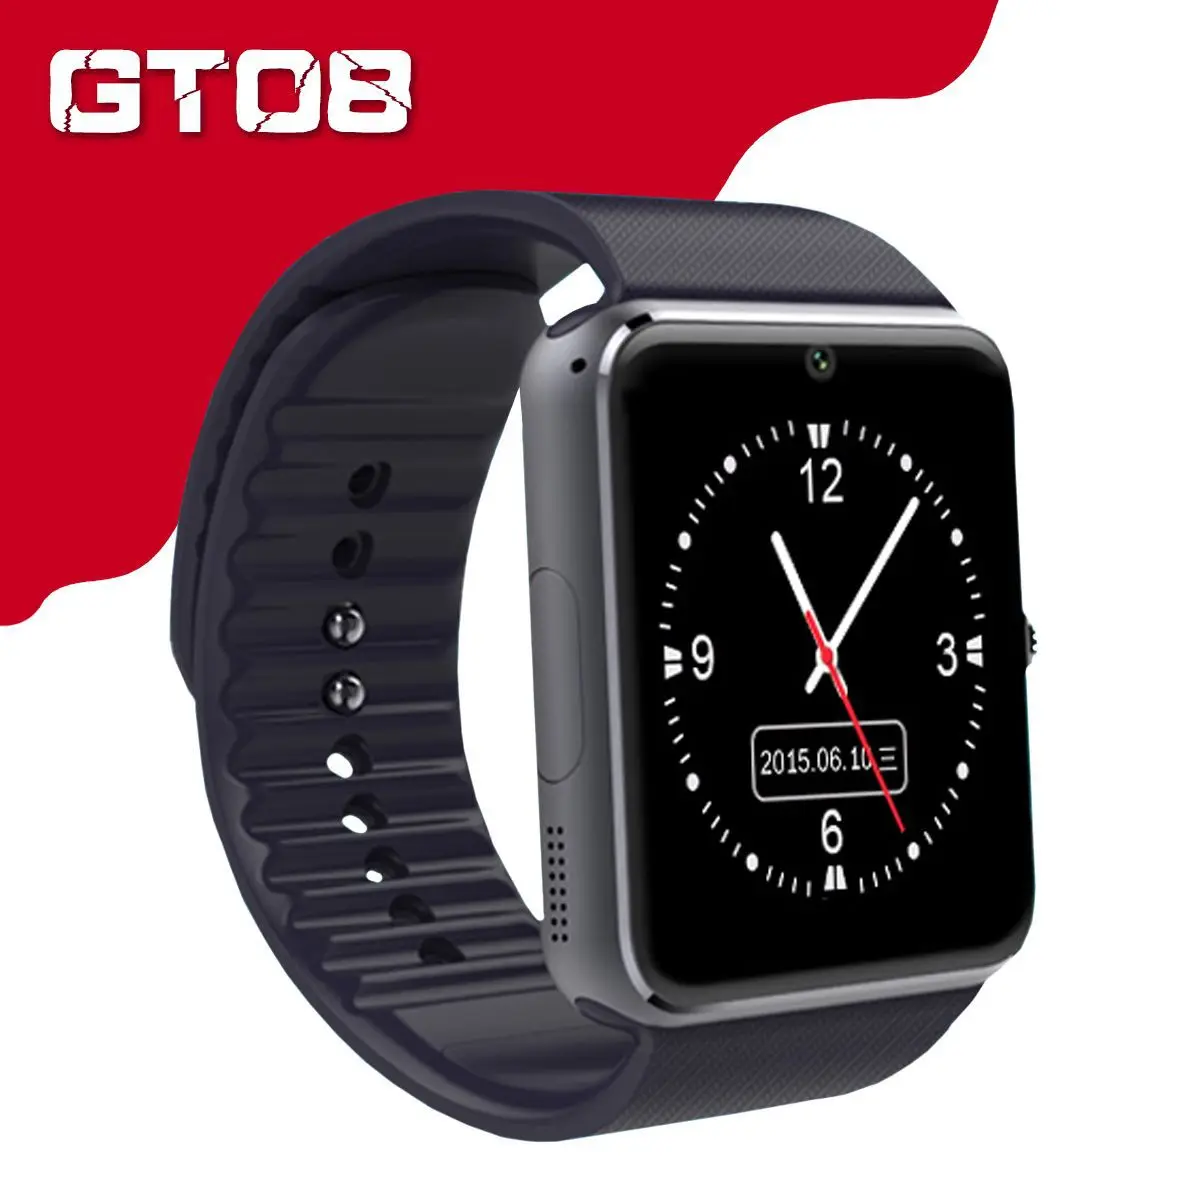 

GT08 Smart Watch Bluetooth Smartwatches For Android Smartphones SIM Card Slot NFC Health Watchs for Android with Retail Box